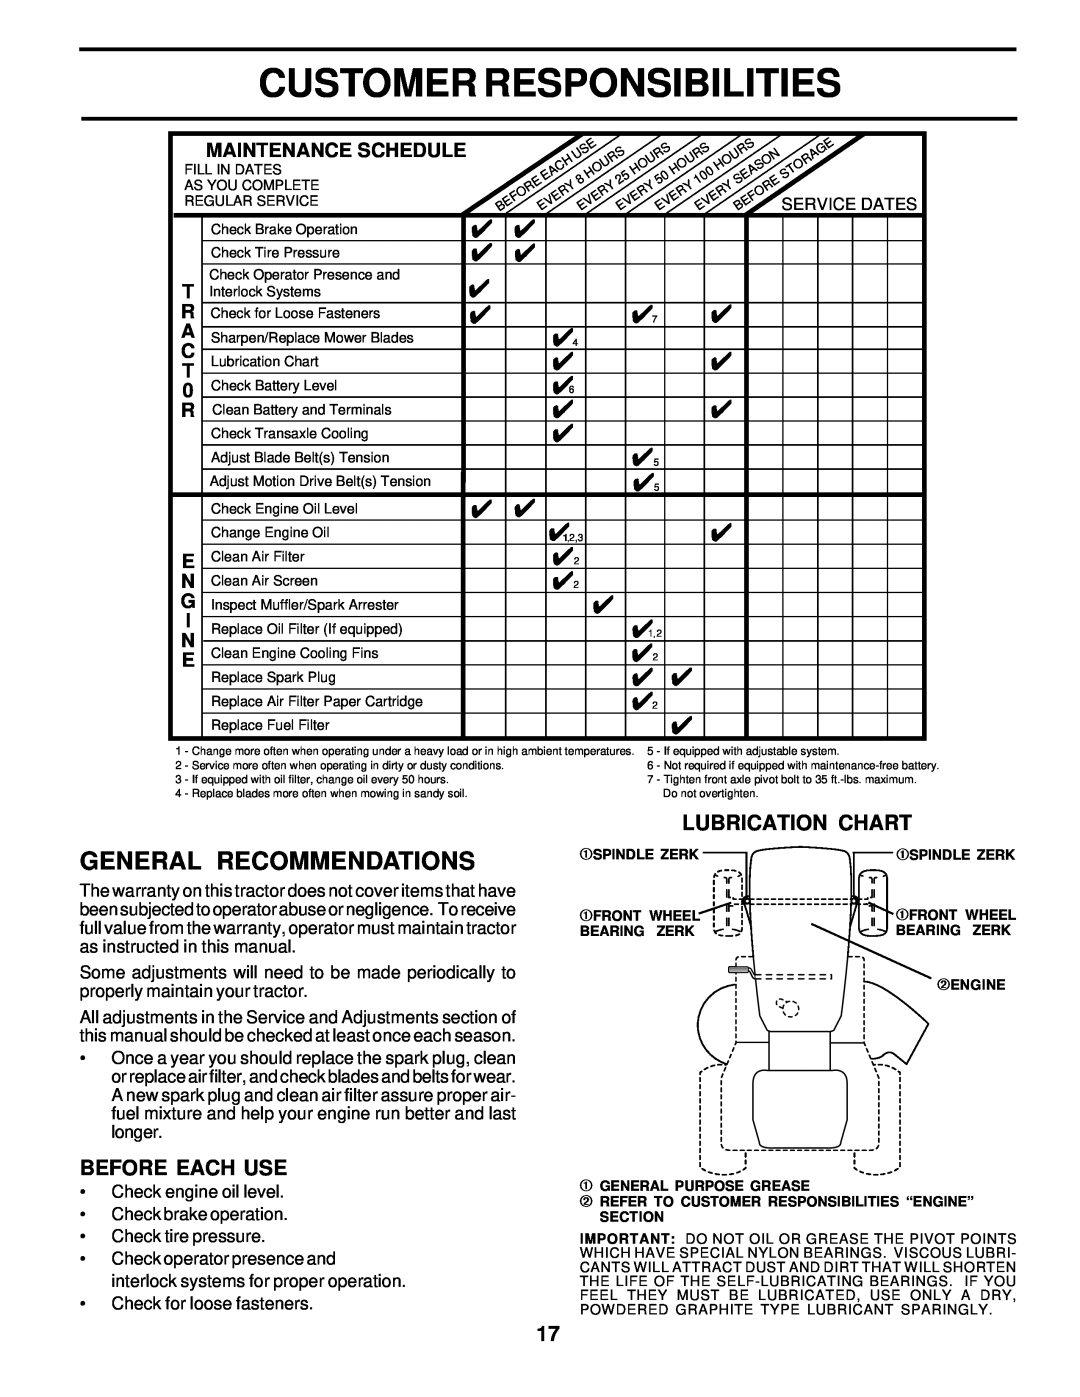 Poulan DPR22H46STB owner manual Customer Responsibilities, General Recommendations, Before Each Use, Lubrication Chart 